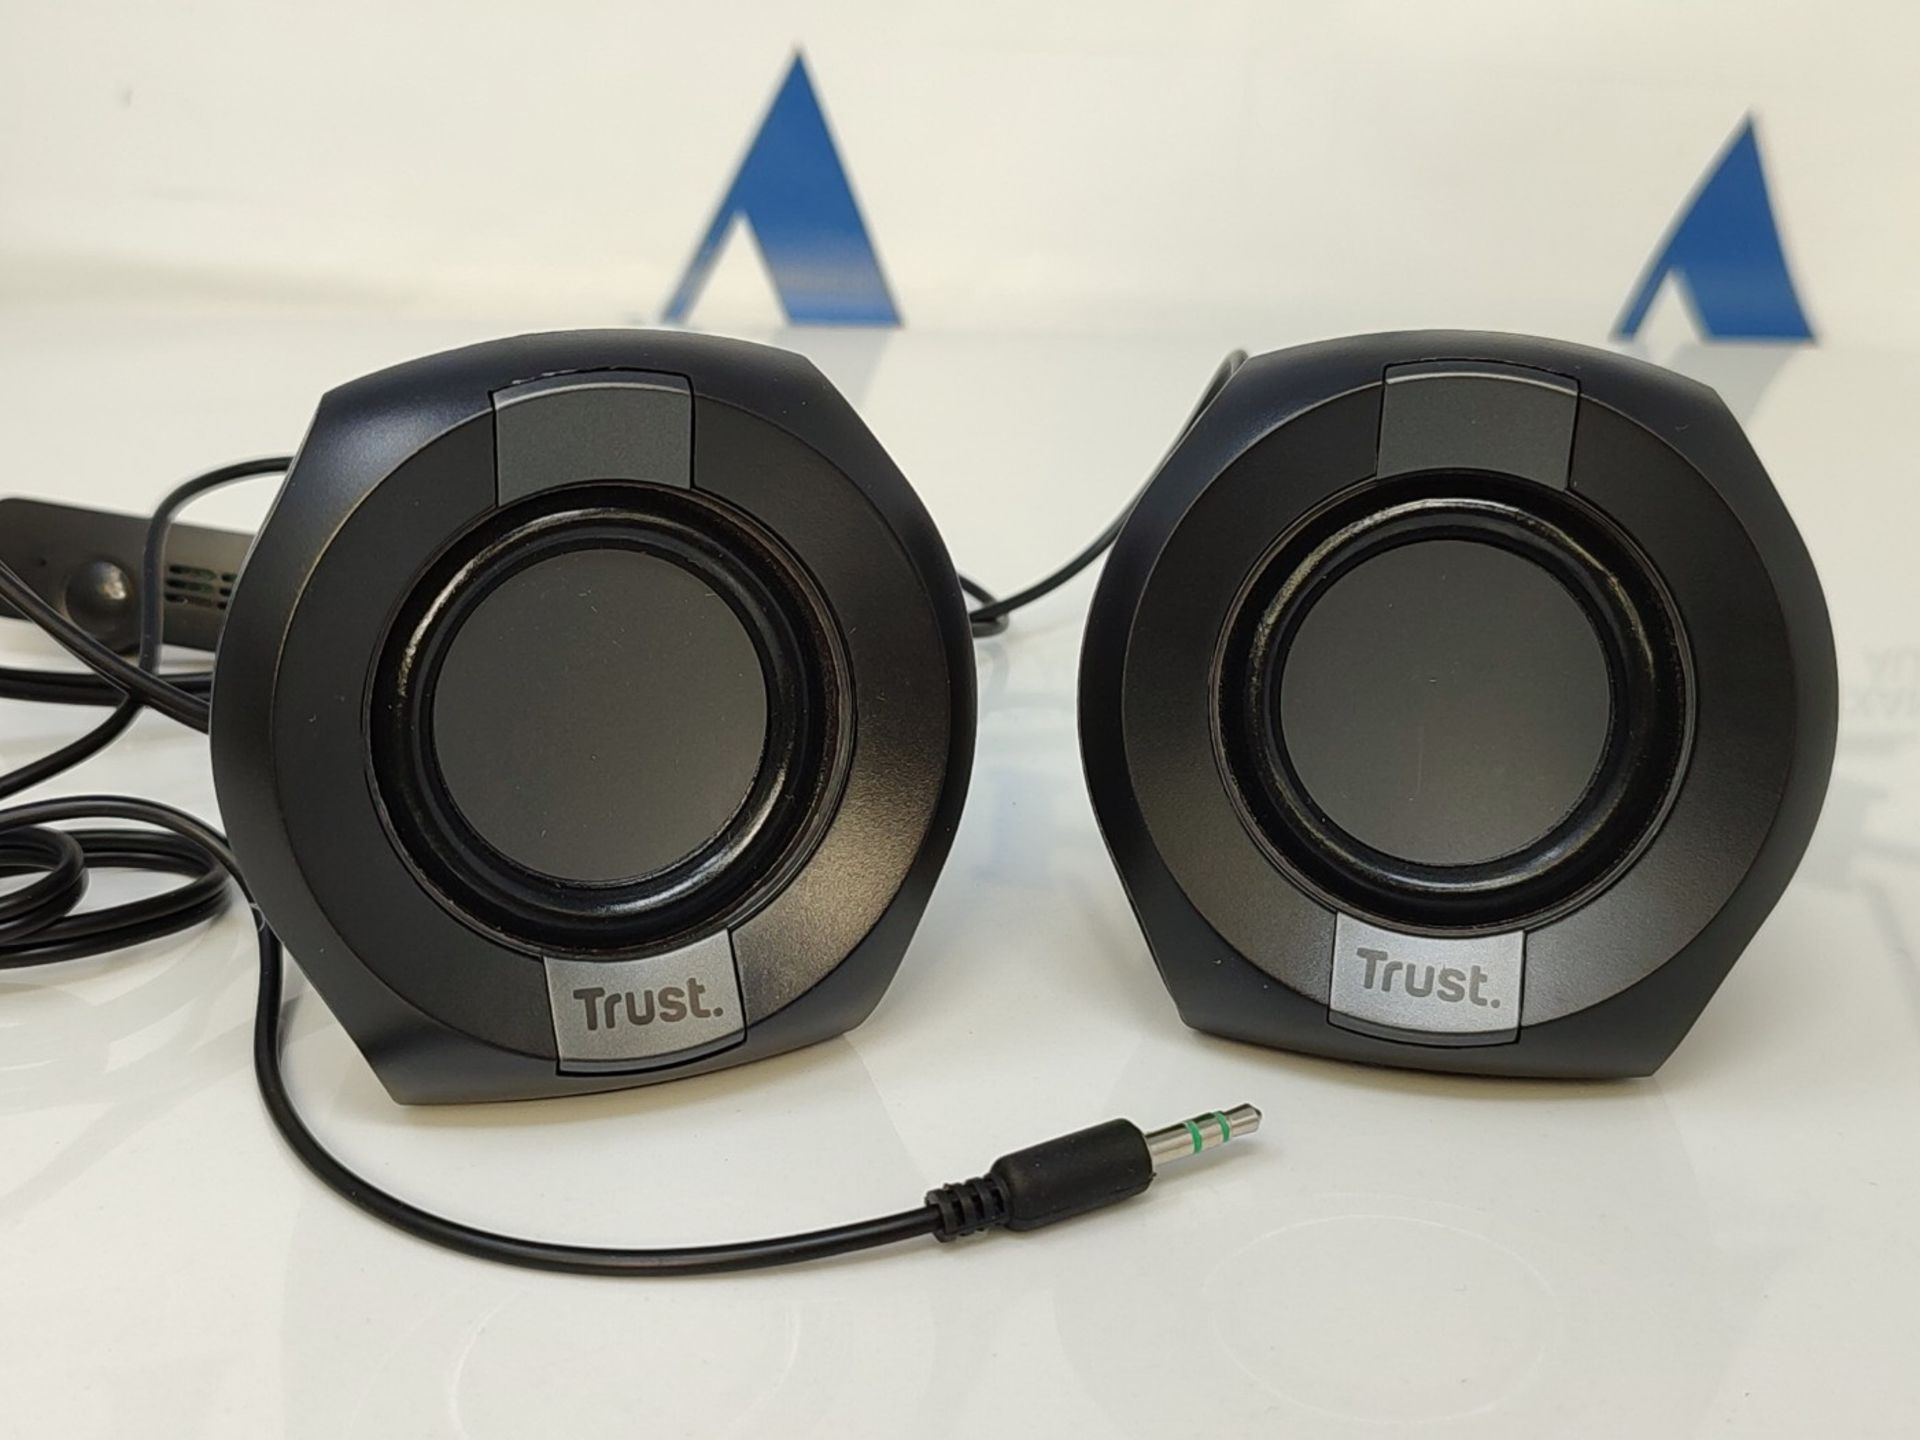 Trust Polo Small PC Speakers 2.0, 8W (4W RMS), Compact speaker set, USB powered speake - Image 6 of 6